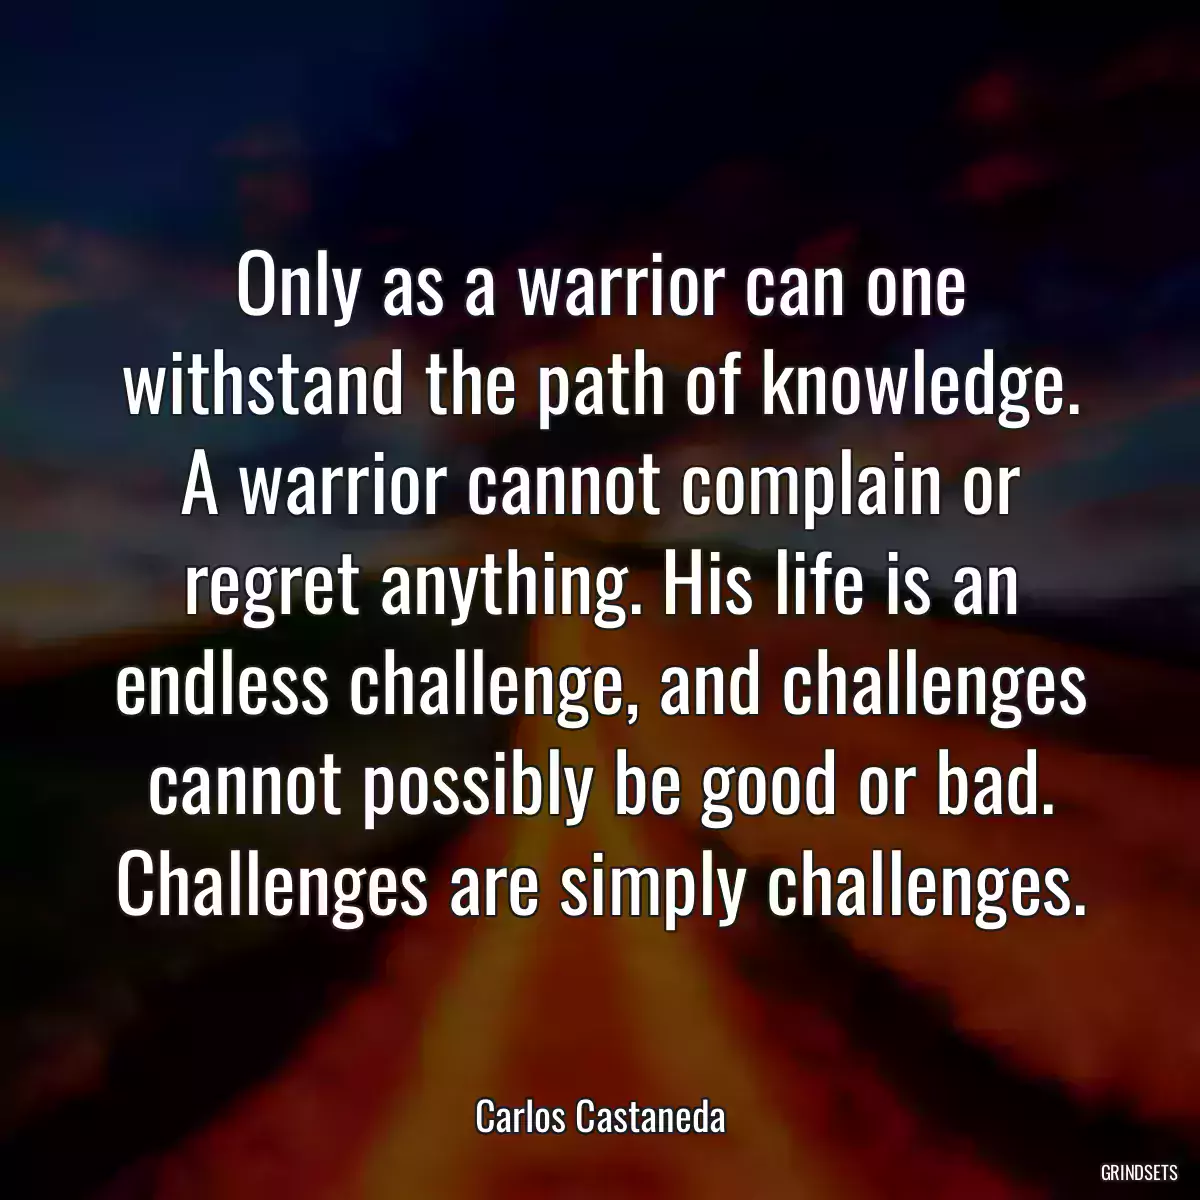 Only as a warrior can one withstand the path of knowledge. A warrior cannot complain or regret anything. His life is an endless challenge, and challenges cannot possibly be good or bad. Challenges are simply challenges.